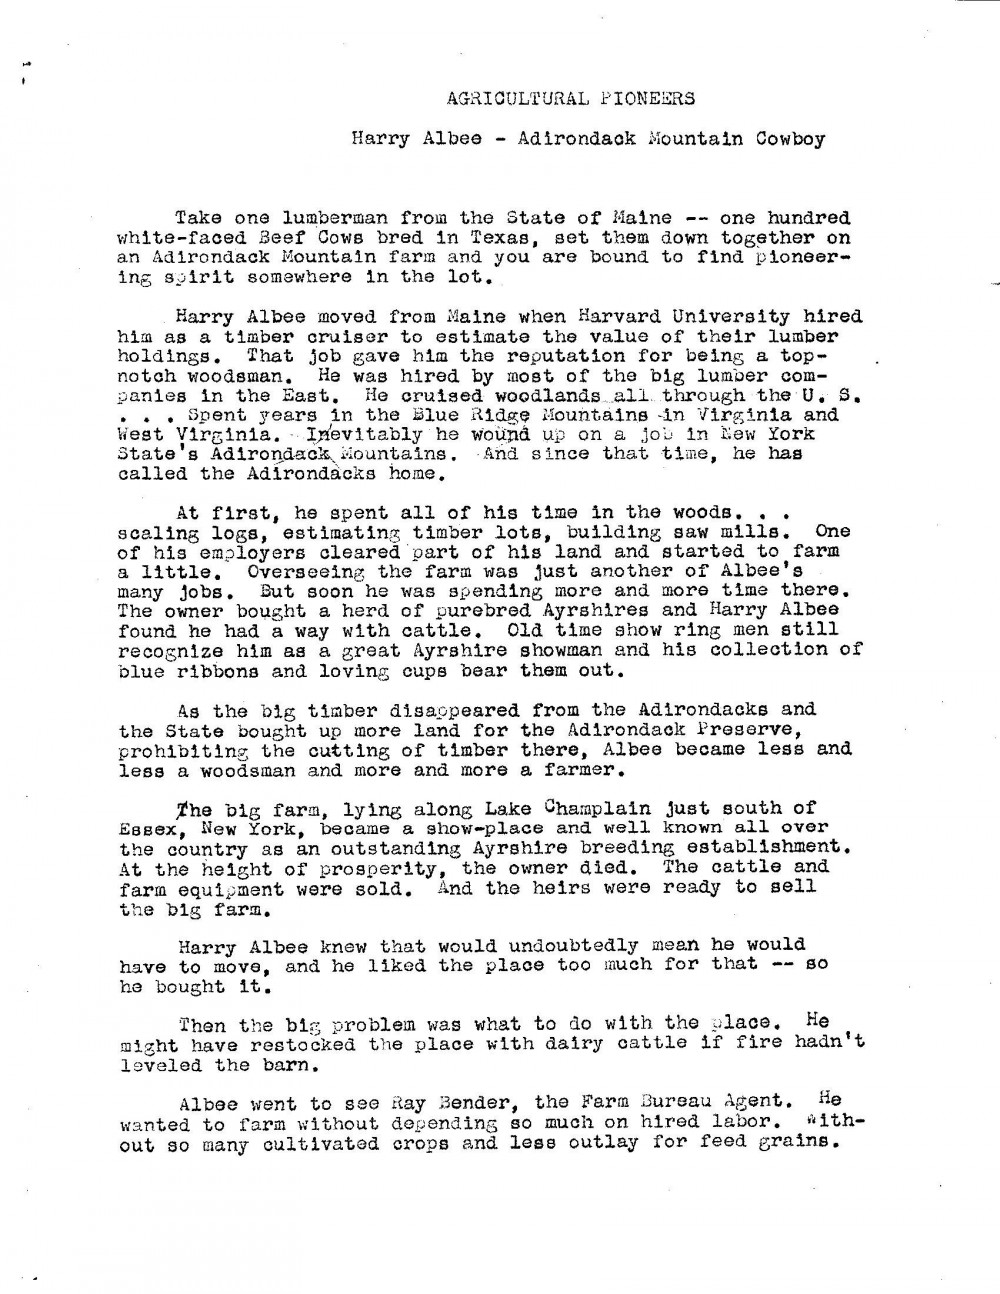 Agricultural Pioneers: Harry Albee — Adirondack Mountain Cowboy, pg.1 by Marjorie Albee (Click to read full-size)